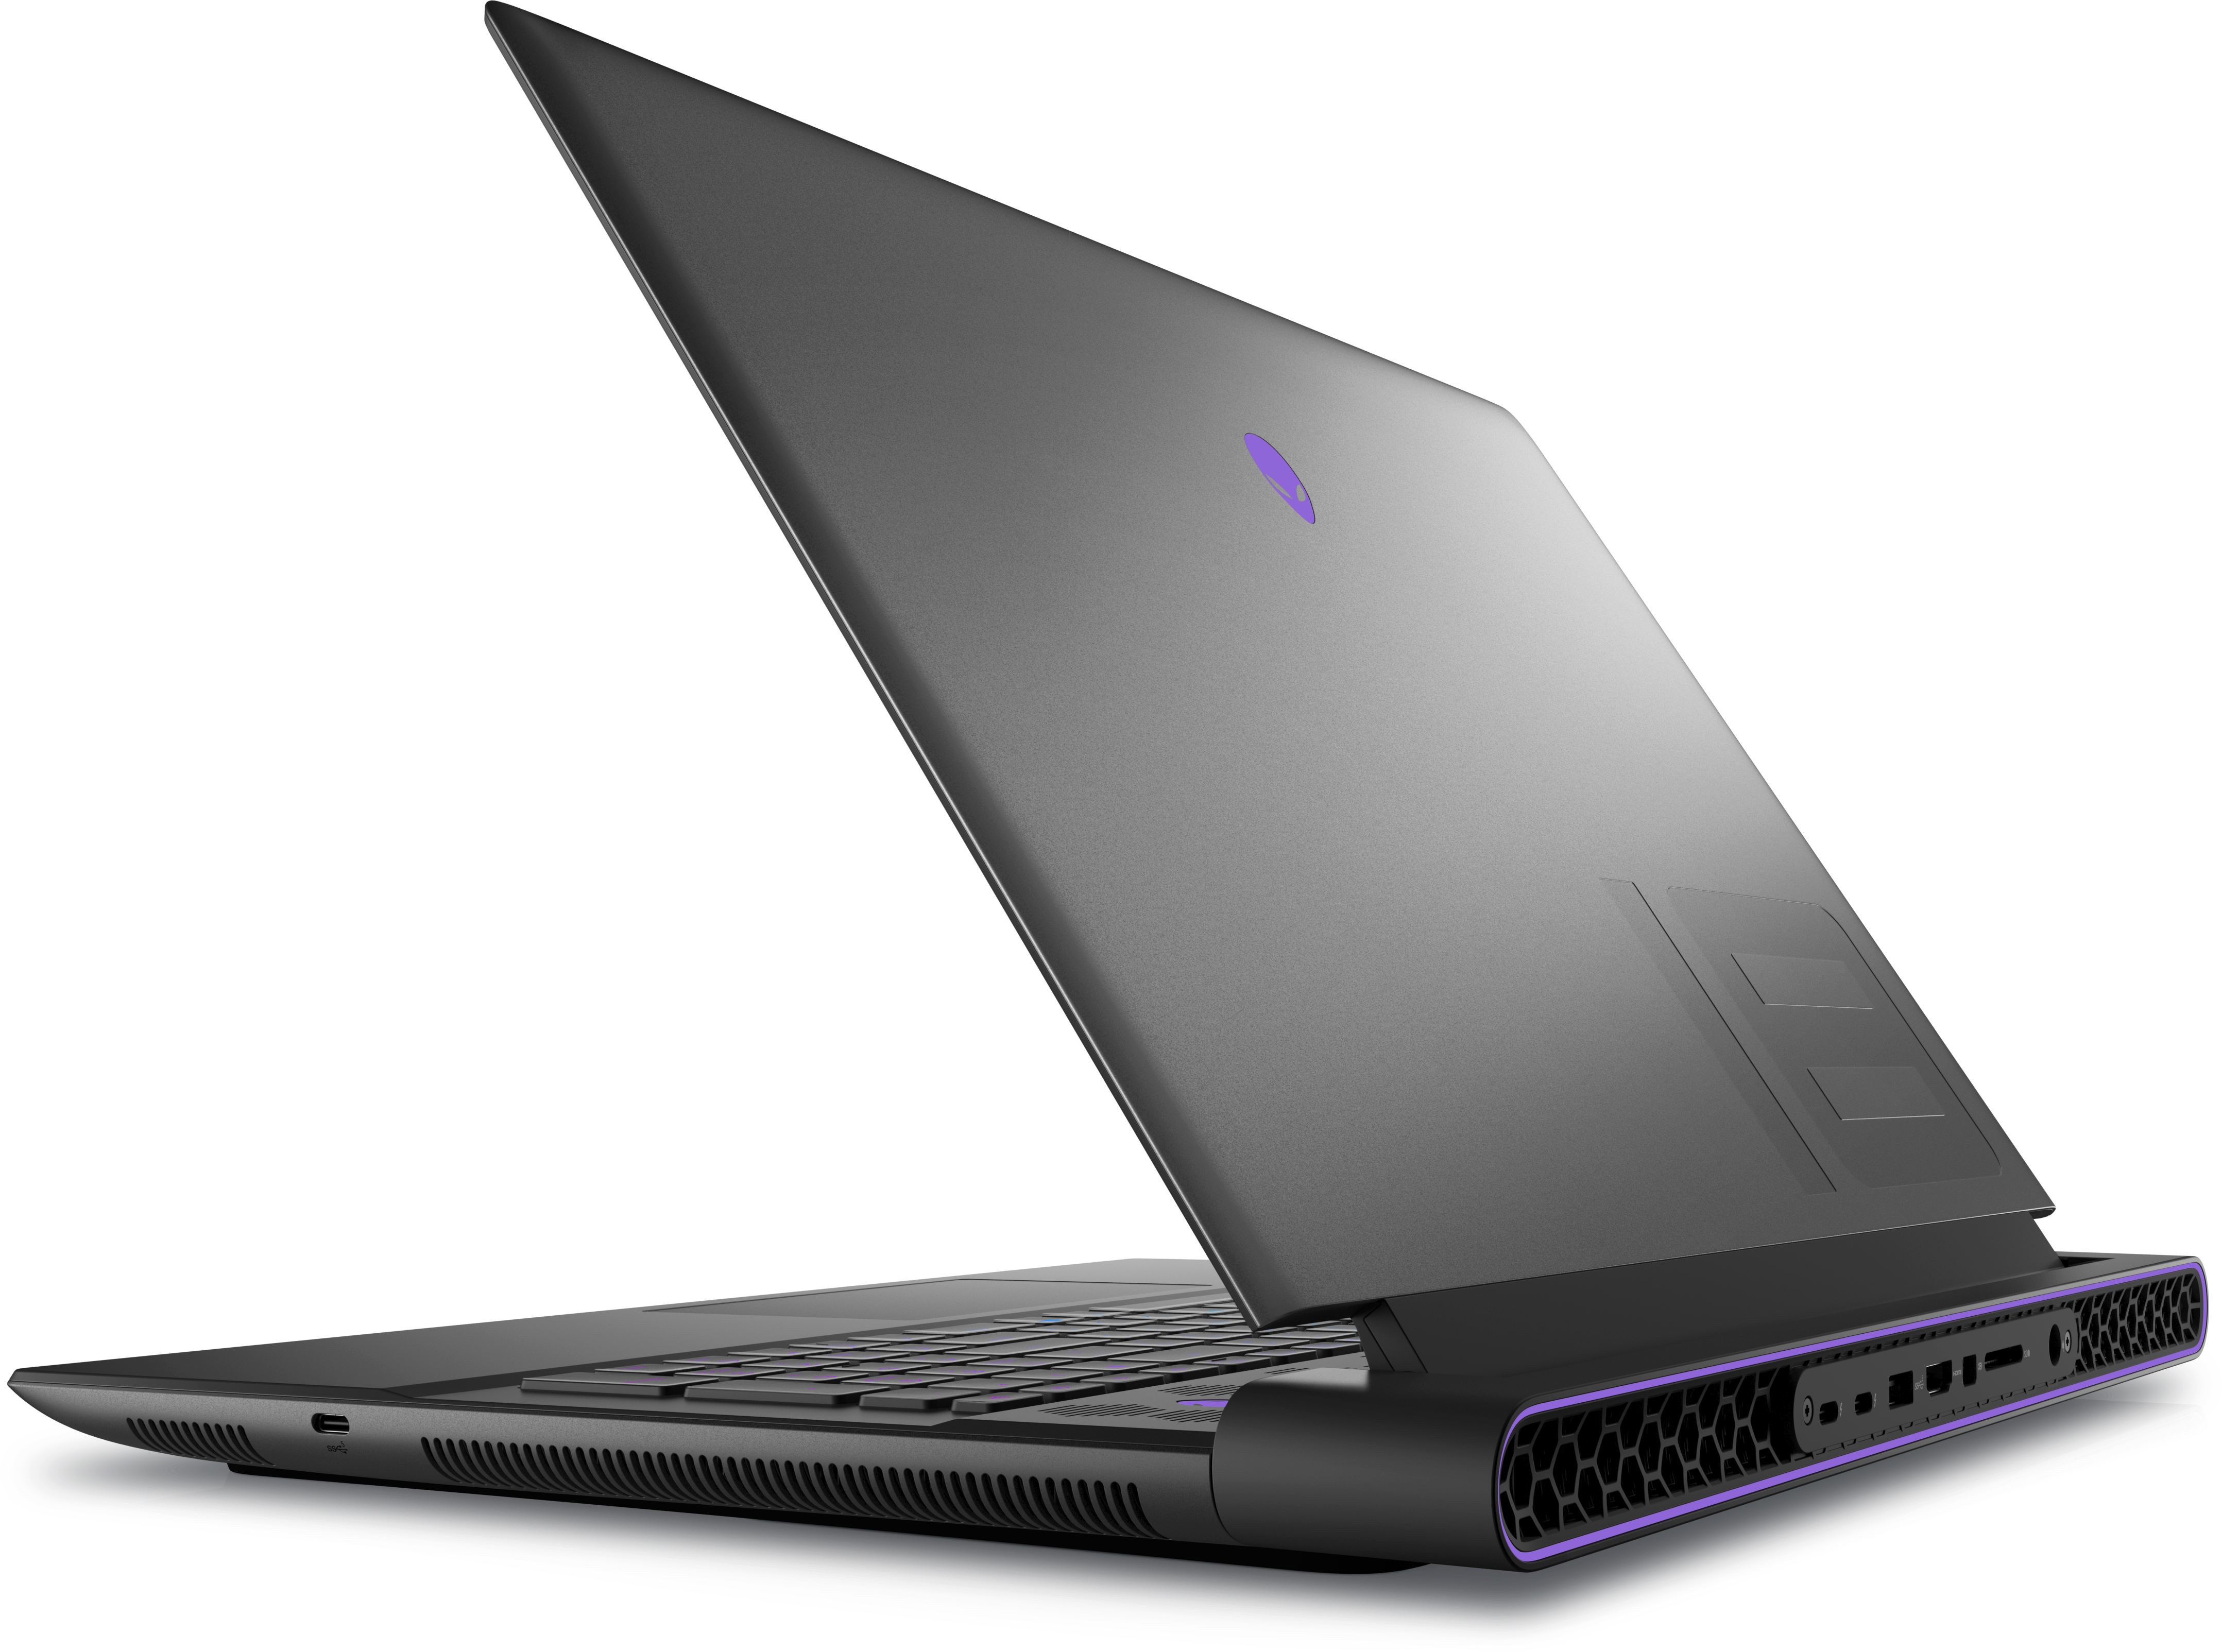 Dell Alienware M18 Gaming Laptop, 13th Gen Intel Core i9 13900HX (24-Core, 36MB L3 Cache, Up to 5.4 GHz Max Turbo), Windows 11 Pro, English, French, Spanish, NVIDIA GeForce RTX 4080 12GB GDDR6, RAM 32GB 2x16GB DDR5 4800MHz, 1TB Hard Drive PCIe NVMe M.2 SSD, 18" QHD+ (2560x1600) 165Hz Display 3ms ComfortView Plus, NVIDIA G-SYNC + DDS 100% DCI-P3 Color Gamut, Dark Metallic Moon with Alienware CherryMX Ultra Low-Profile Mechanical Keyboard With Per-Key AlienFX Lighting - US English